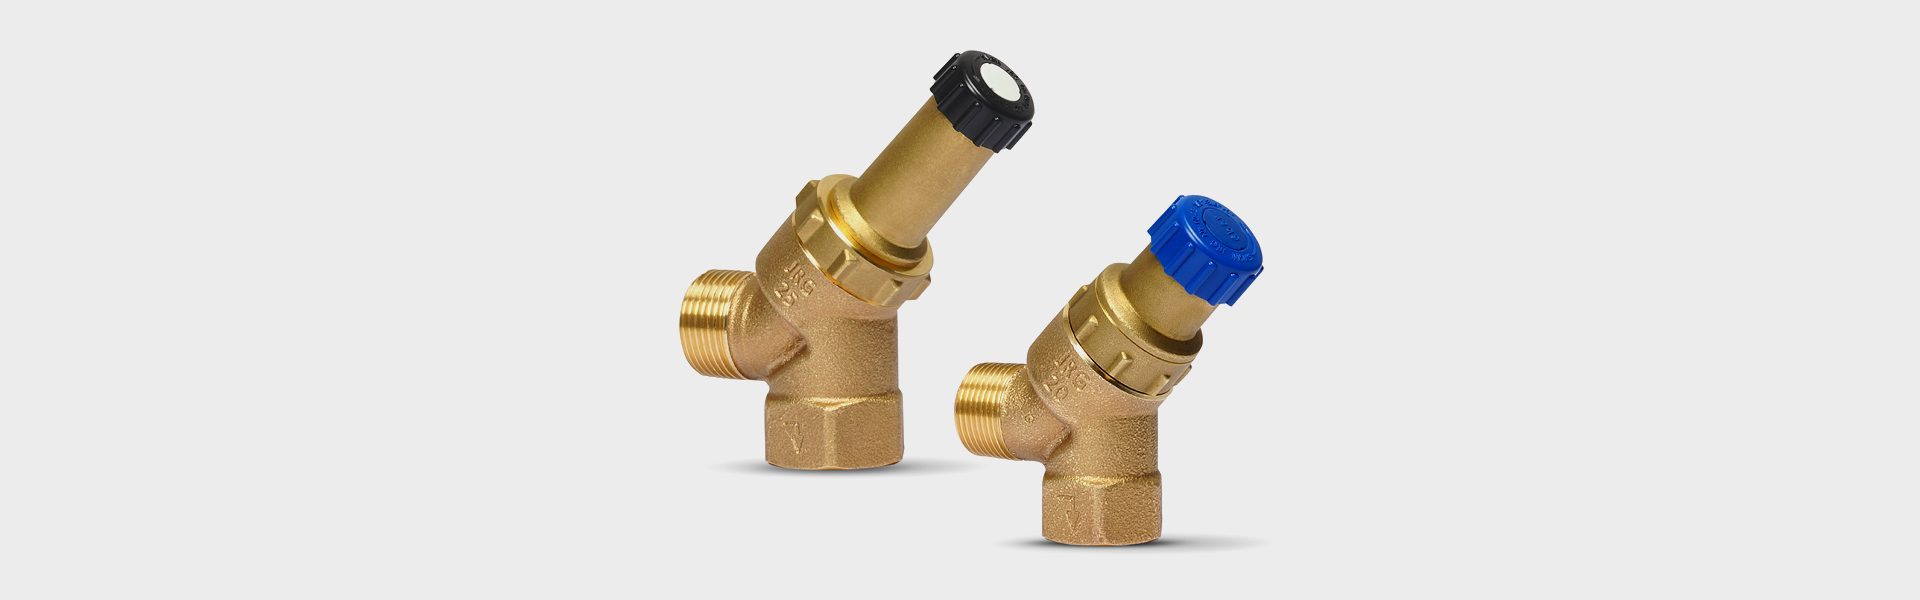 Safety Valves For Water Heaters